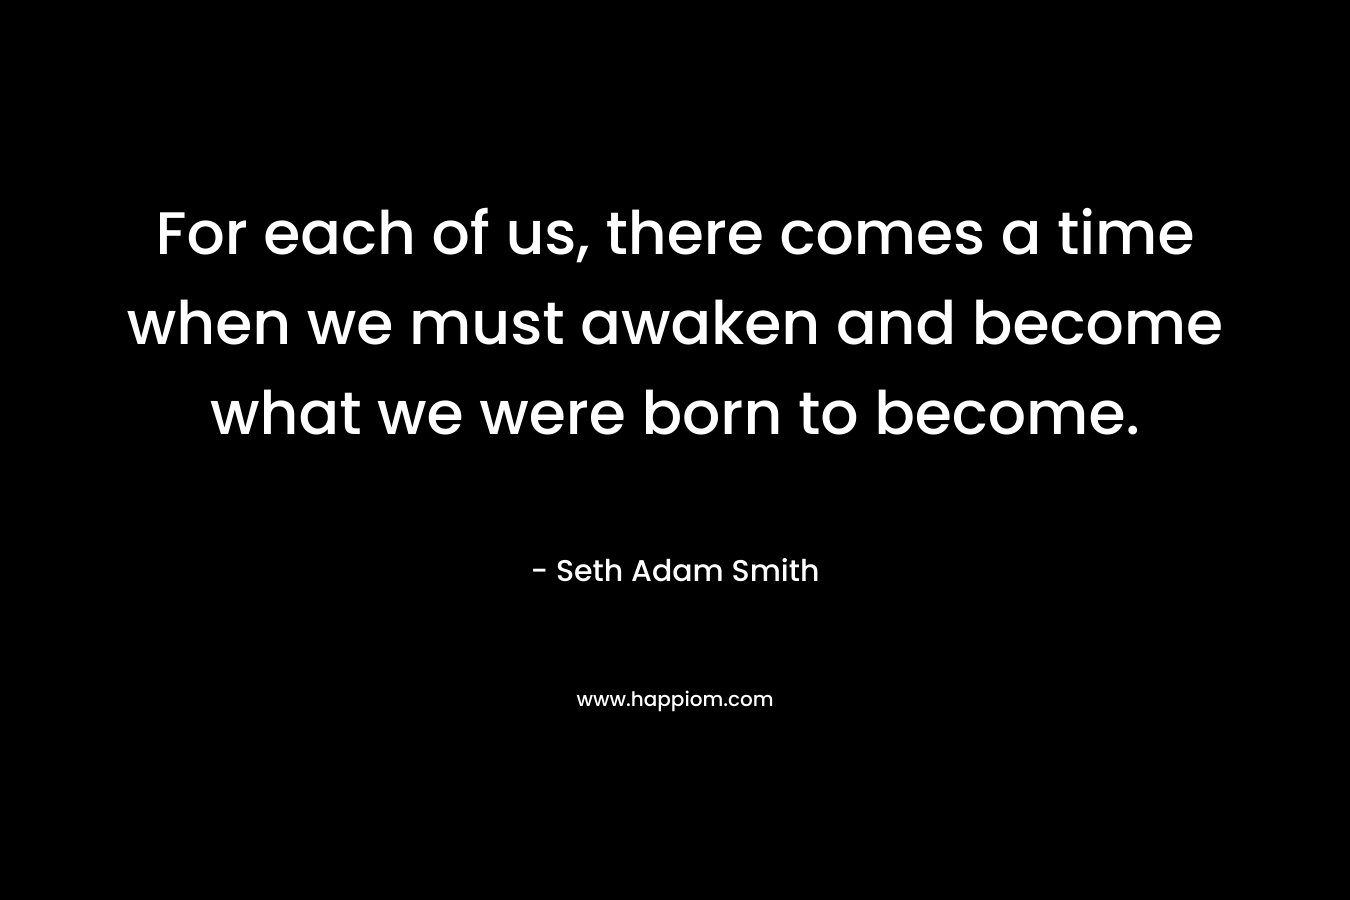 For each of us, there comes a time when we must awaken and become what we were born to become.